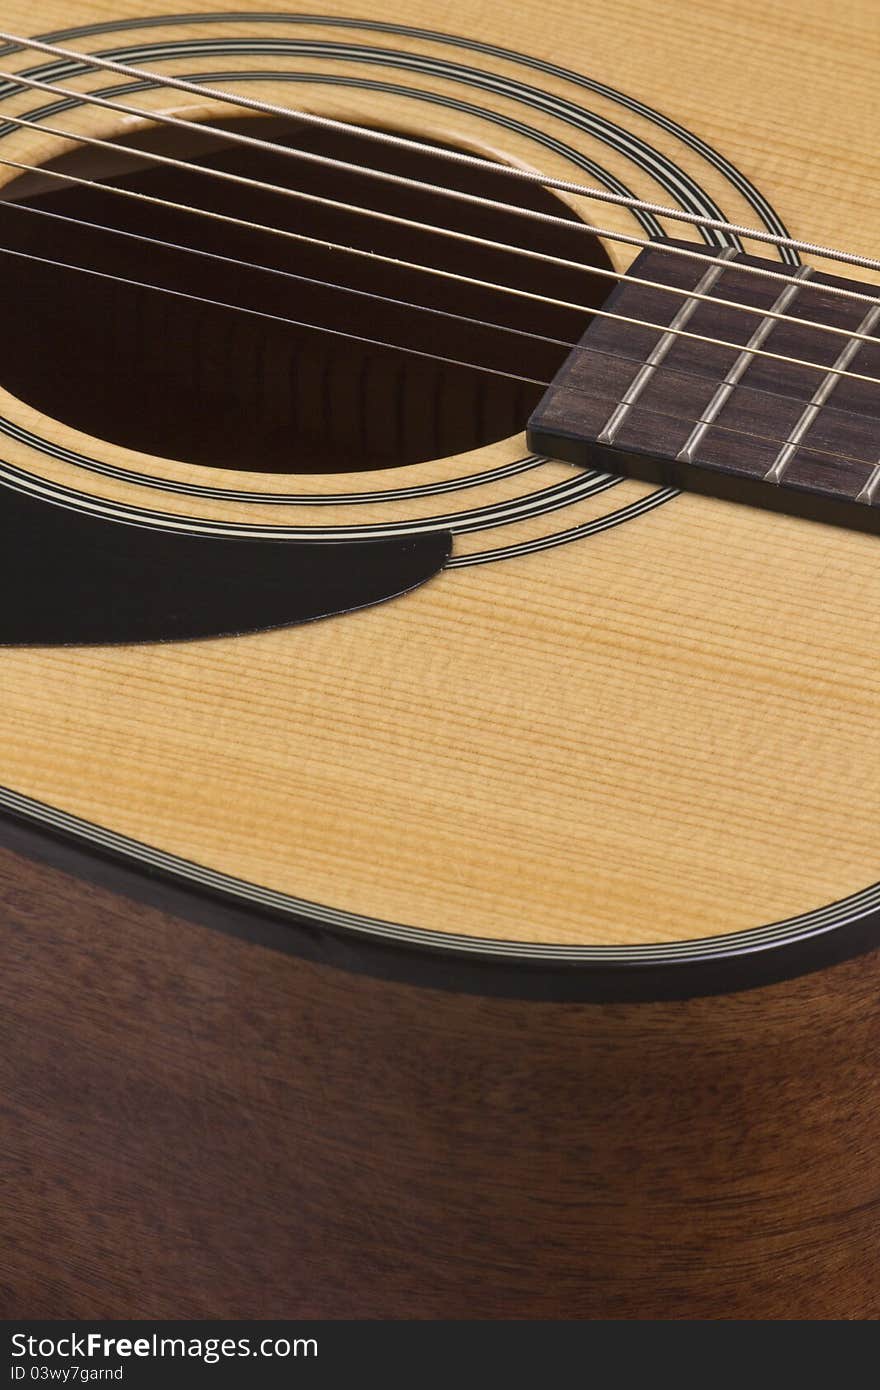 Closeup view of guitar sound hole, strings, and pick guard. Closeup view of guitar sound hole, strings, and pick guard